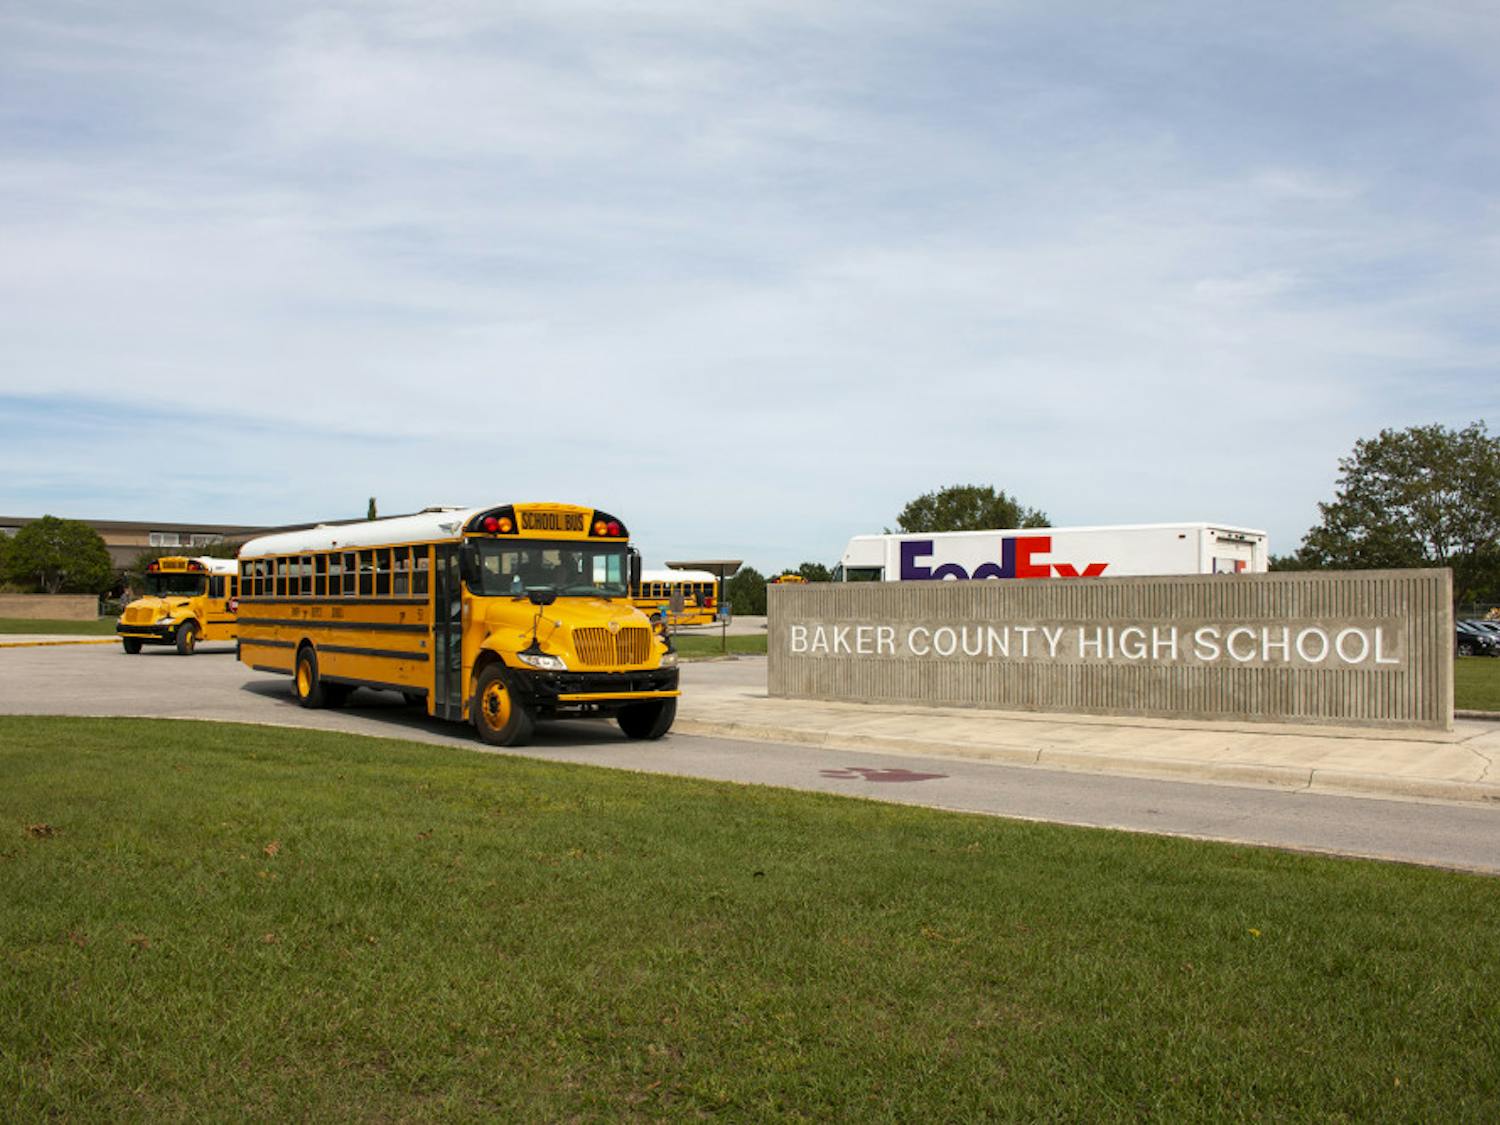 In this Oct. 17, 2019 photo, buses depart from Baker County High School in Glen St. Mary, Fla. Unease spread across Baker County when authorities arrested a 15-year-old who they say planned a massacre at the county's only high school. Anger grew when a judge dismissed second-degree felony charges against the boy.(AP Photo/Bobby Caina Calvan)